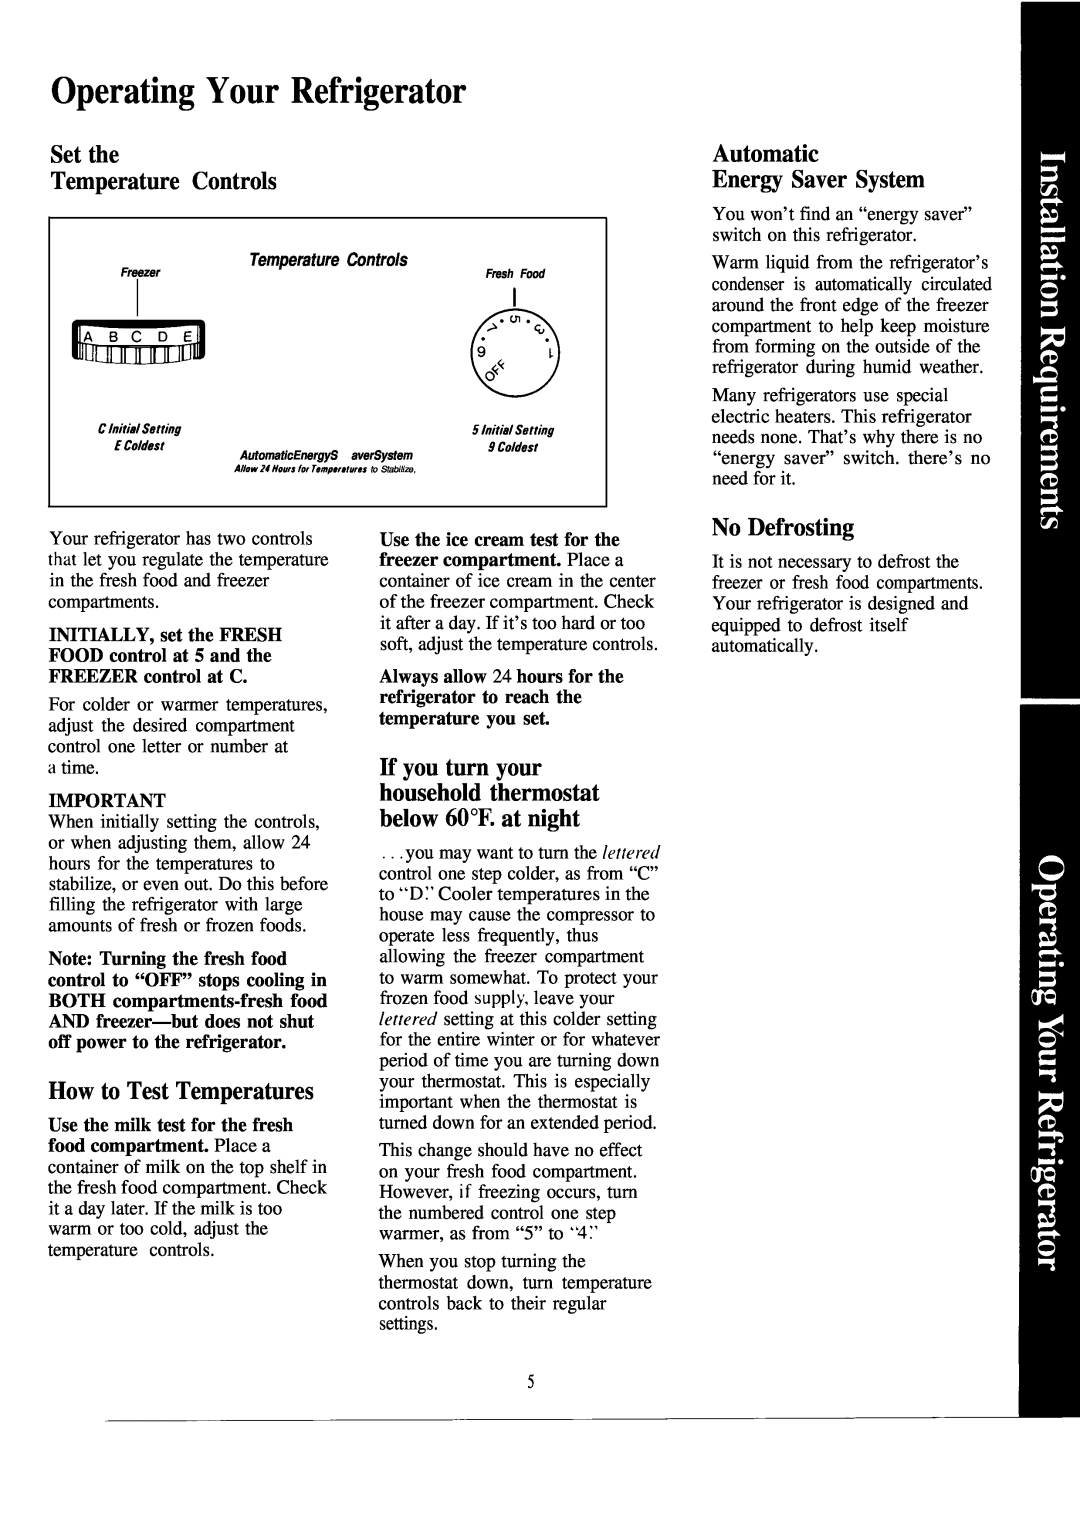 Hotpoint CSX27C Operating Your Refrigerator, Set the Temperature Controls, Automatic Energy Saver System, No Defrosting 